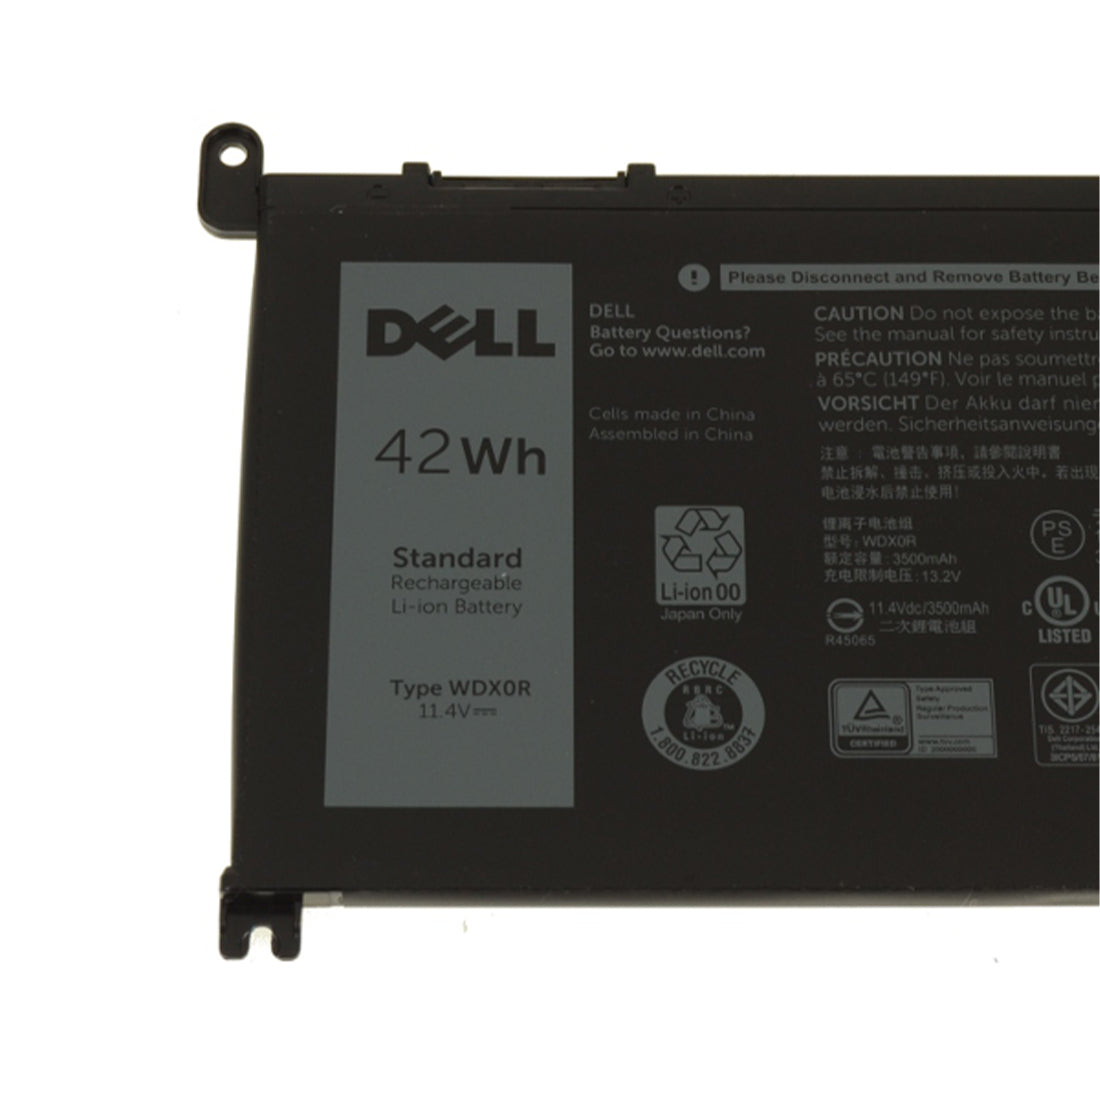 Dell Original 3500mAh 11.4V 42WHR 3-Cell Replacement Laptop Battery for Inspiron 13 5378